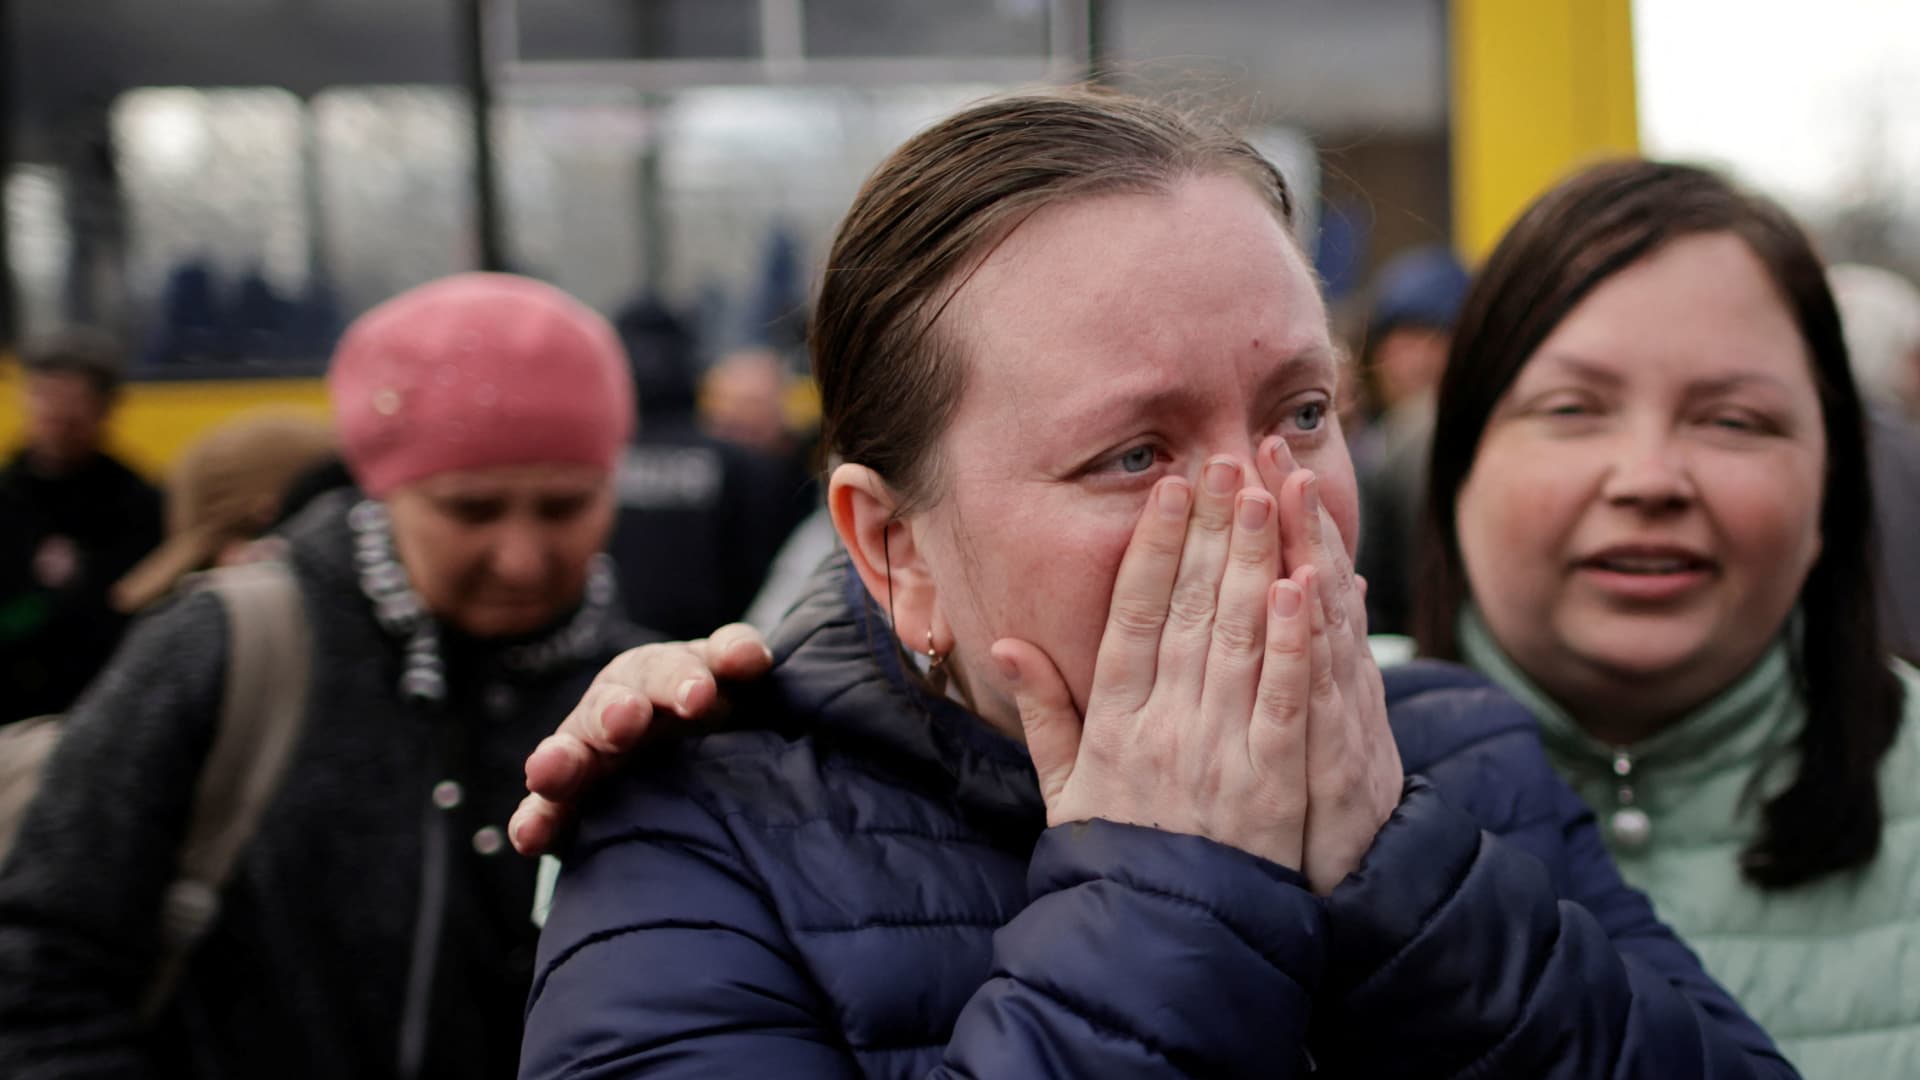 A Ukrainian refugee from Mariupol area cries after arriving in a small convoy that crossed through a territory held by Russian forces, after the opening of a humanitarian corridor, at a registration center for internally displaced people, amid Russia's invasion of Ukraine, in Zaporizhzhia, Ukraine April 21, 2022.